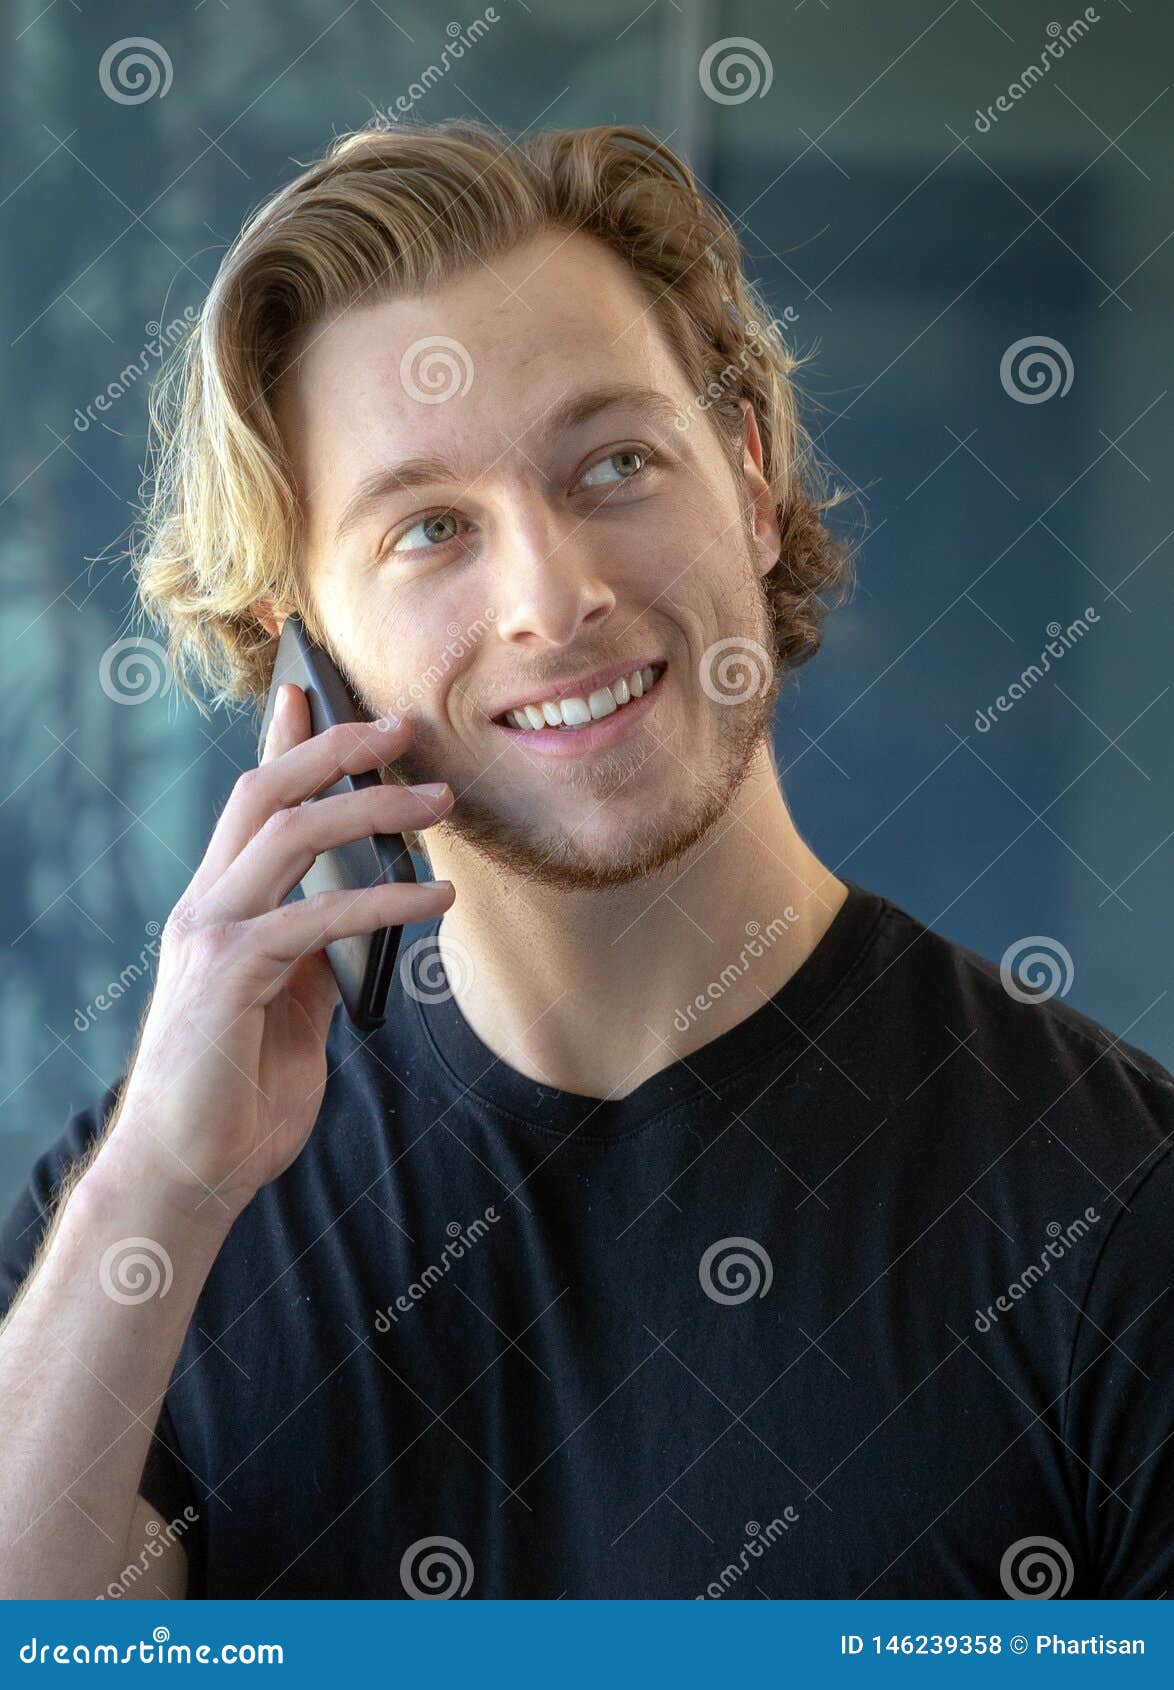 Handsome Young Man Blonde Hair And Stubble Wearing Shirt Stock